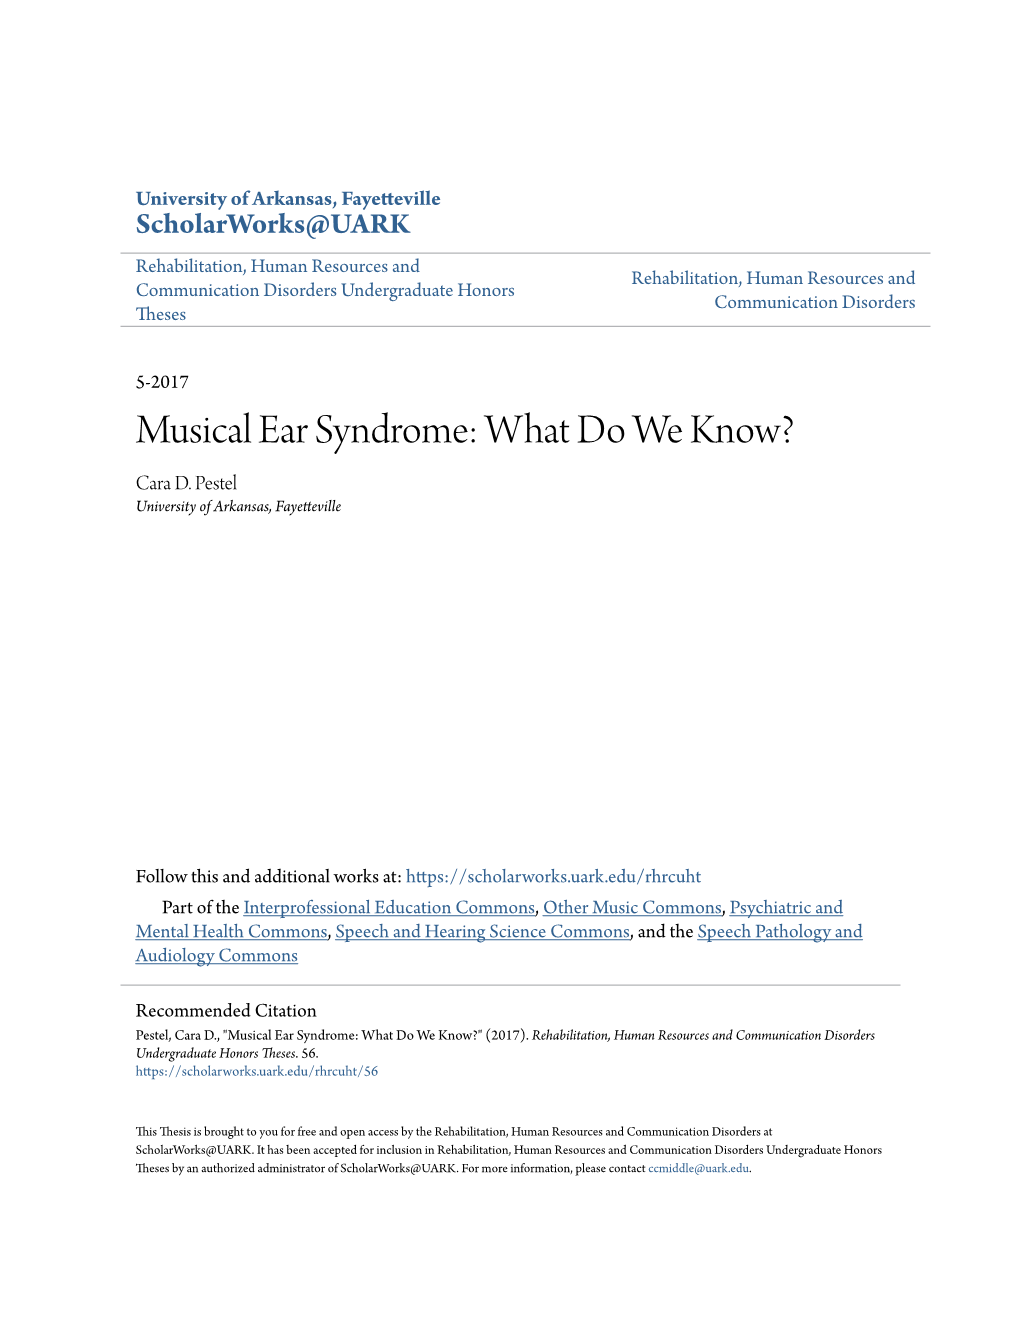 Musical Ear Syndrome: What Do We Know? Cara D